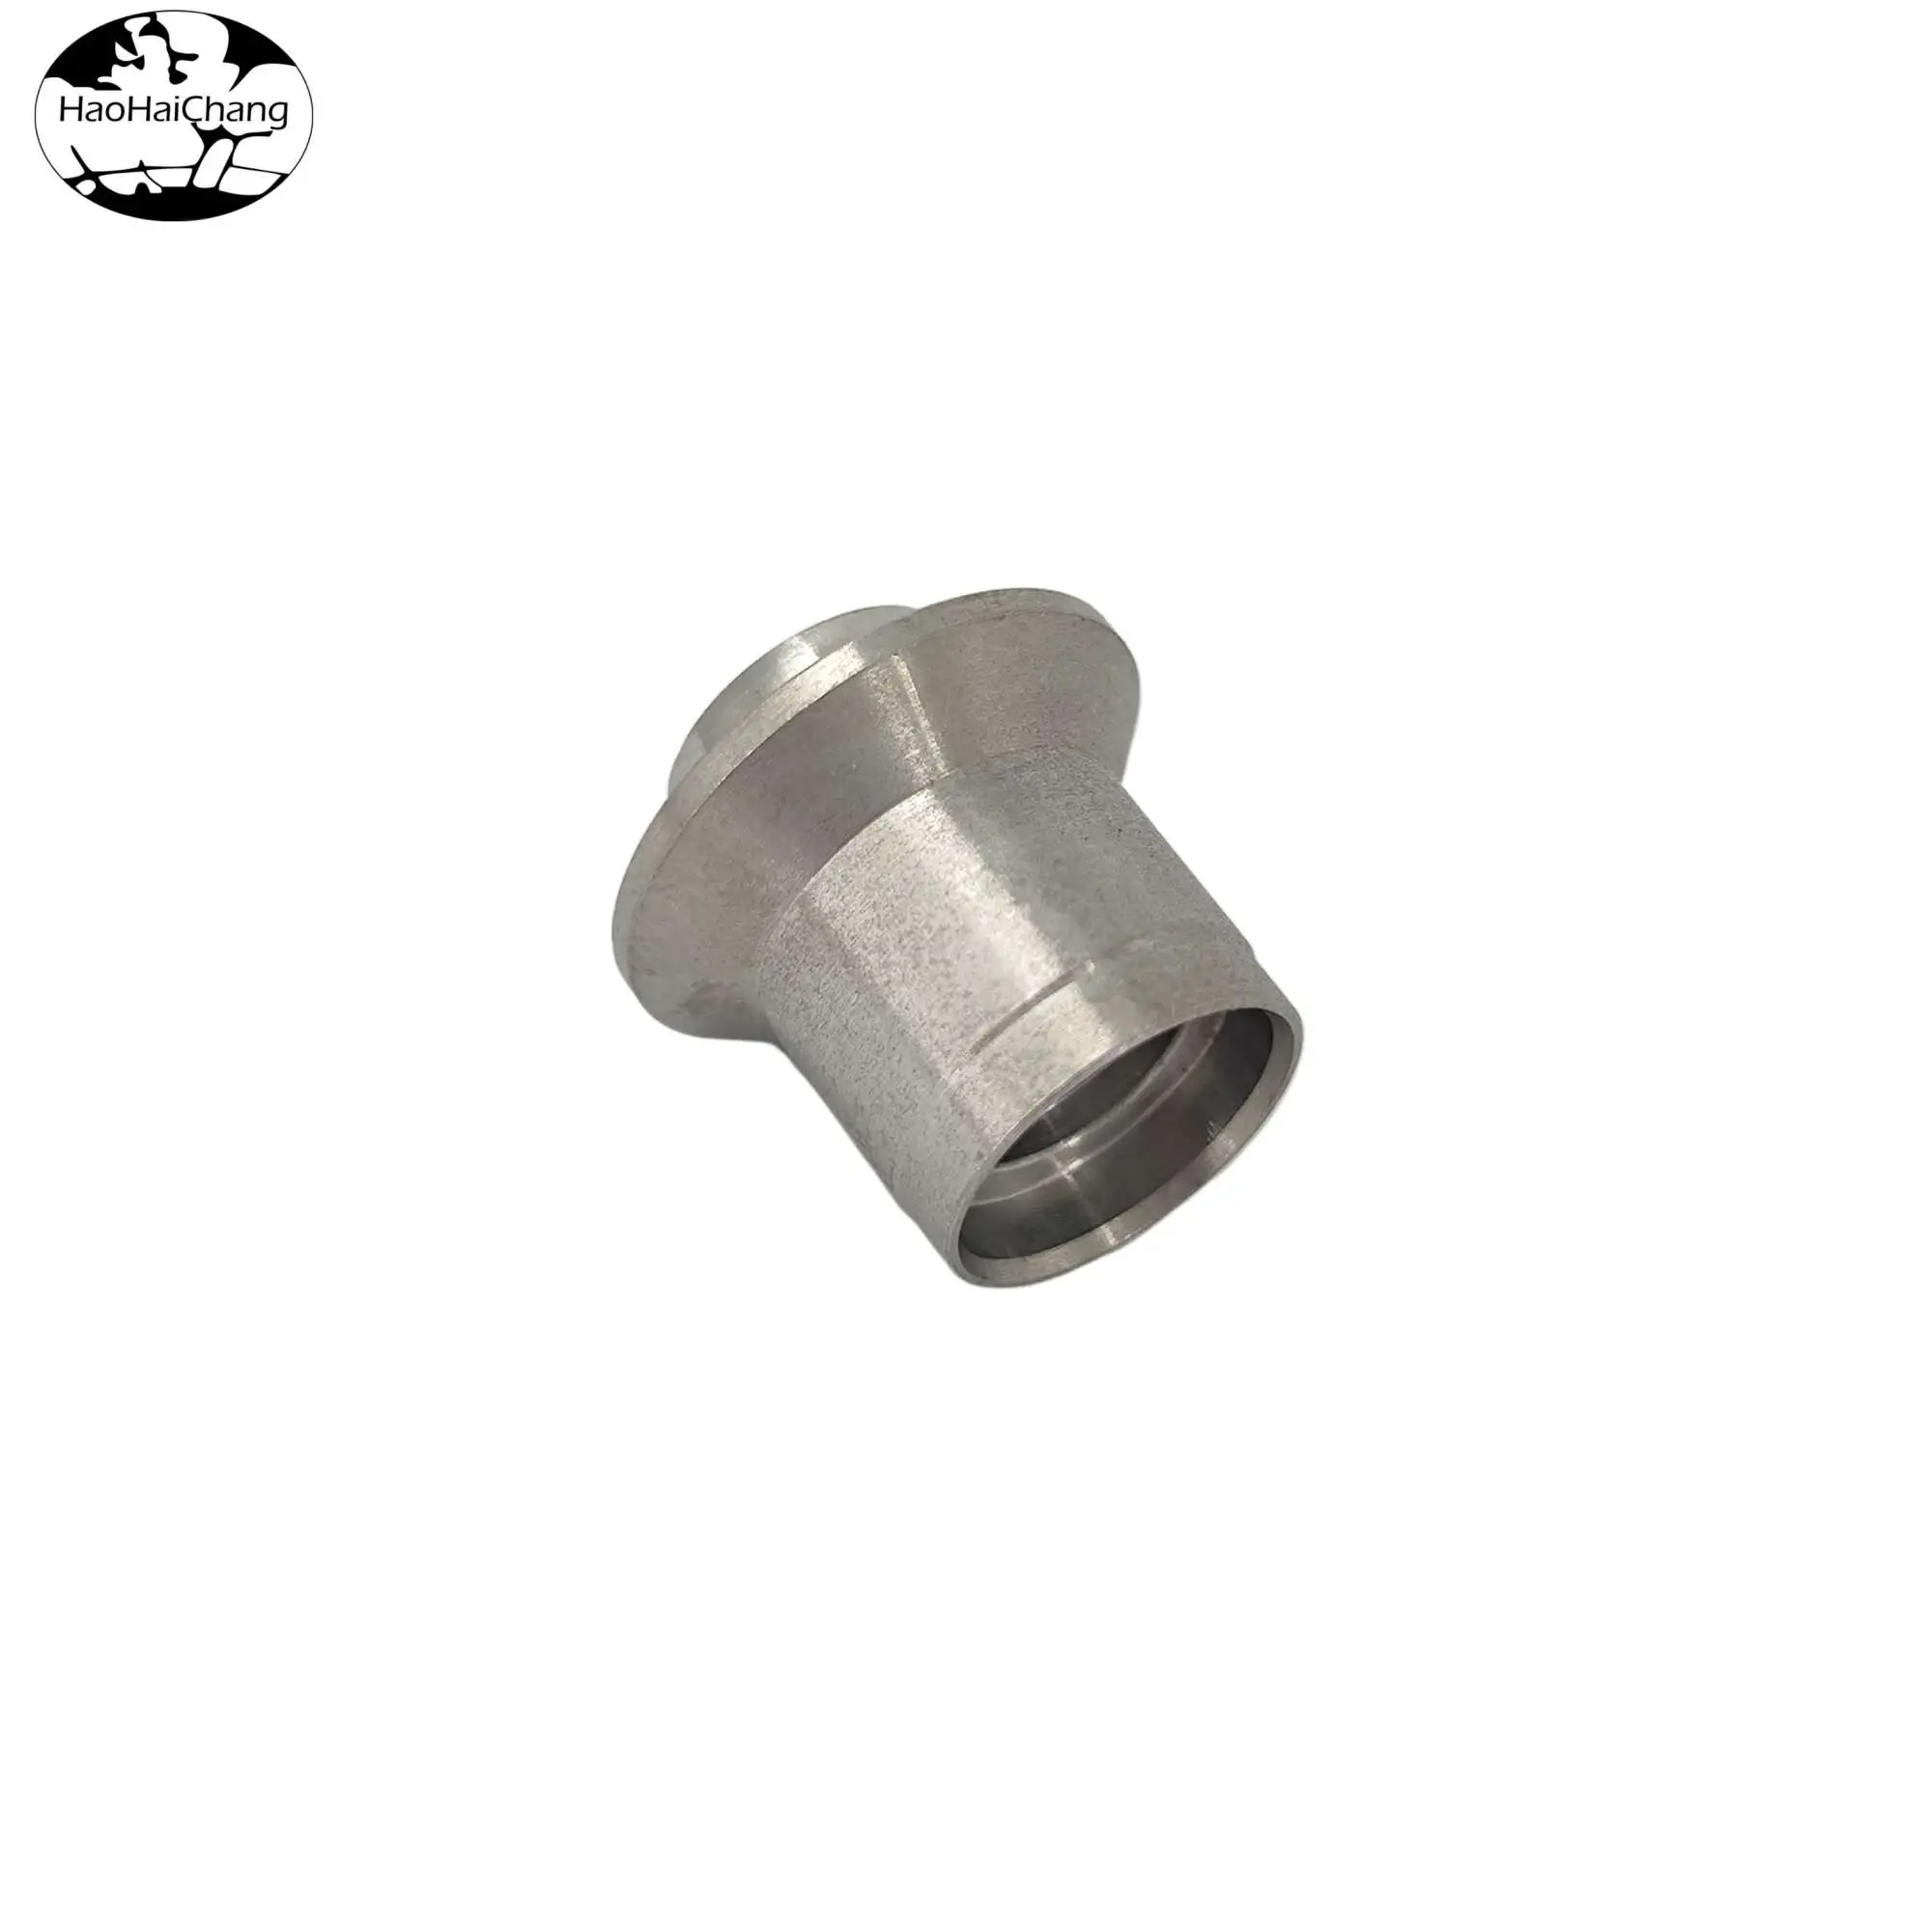 HHC-729 Cylindrical Parts Rivets Hollow Joints